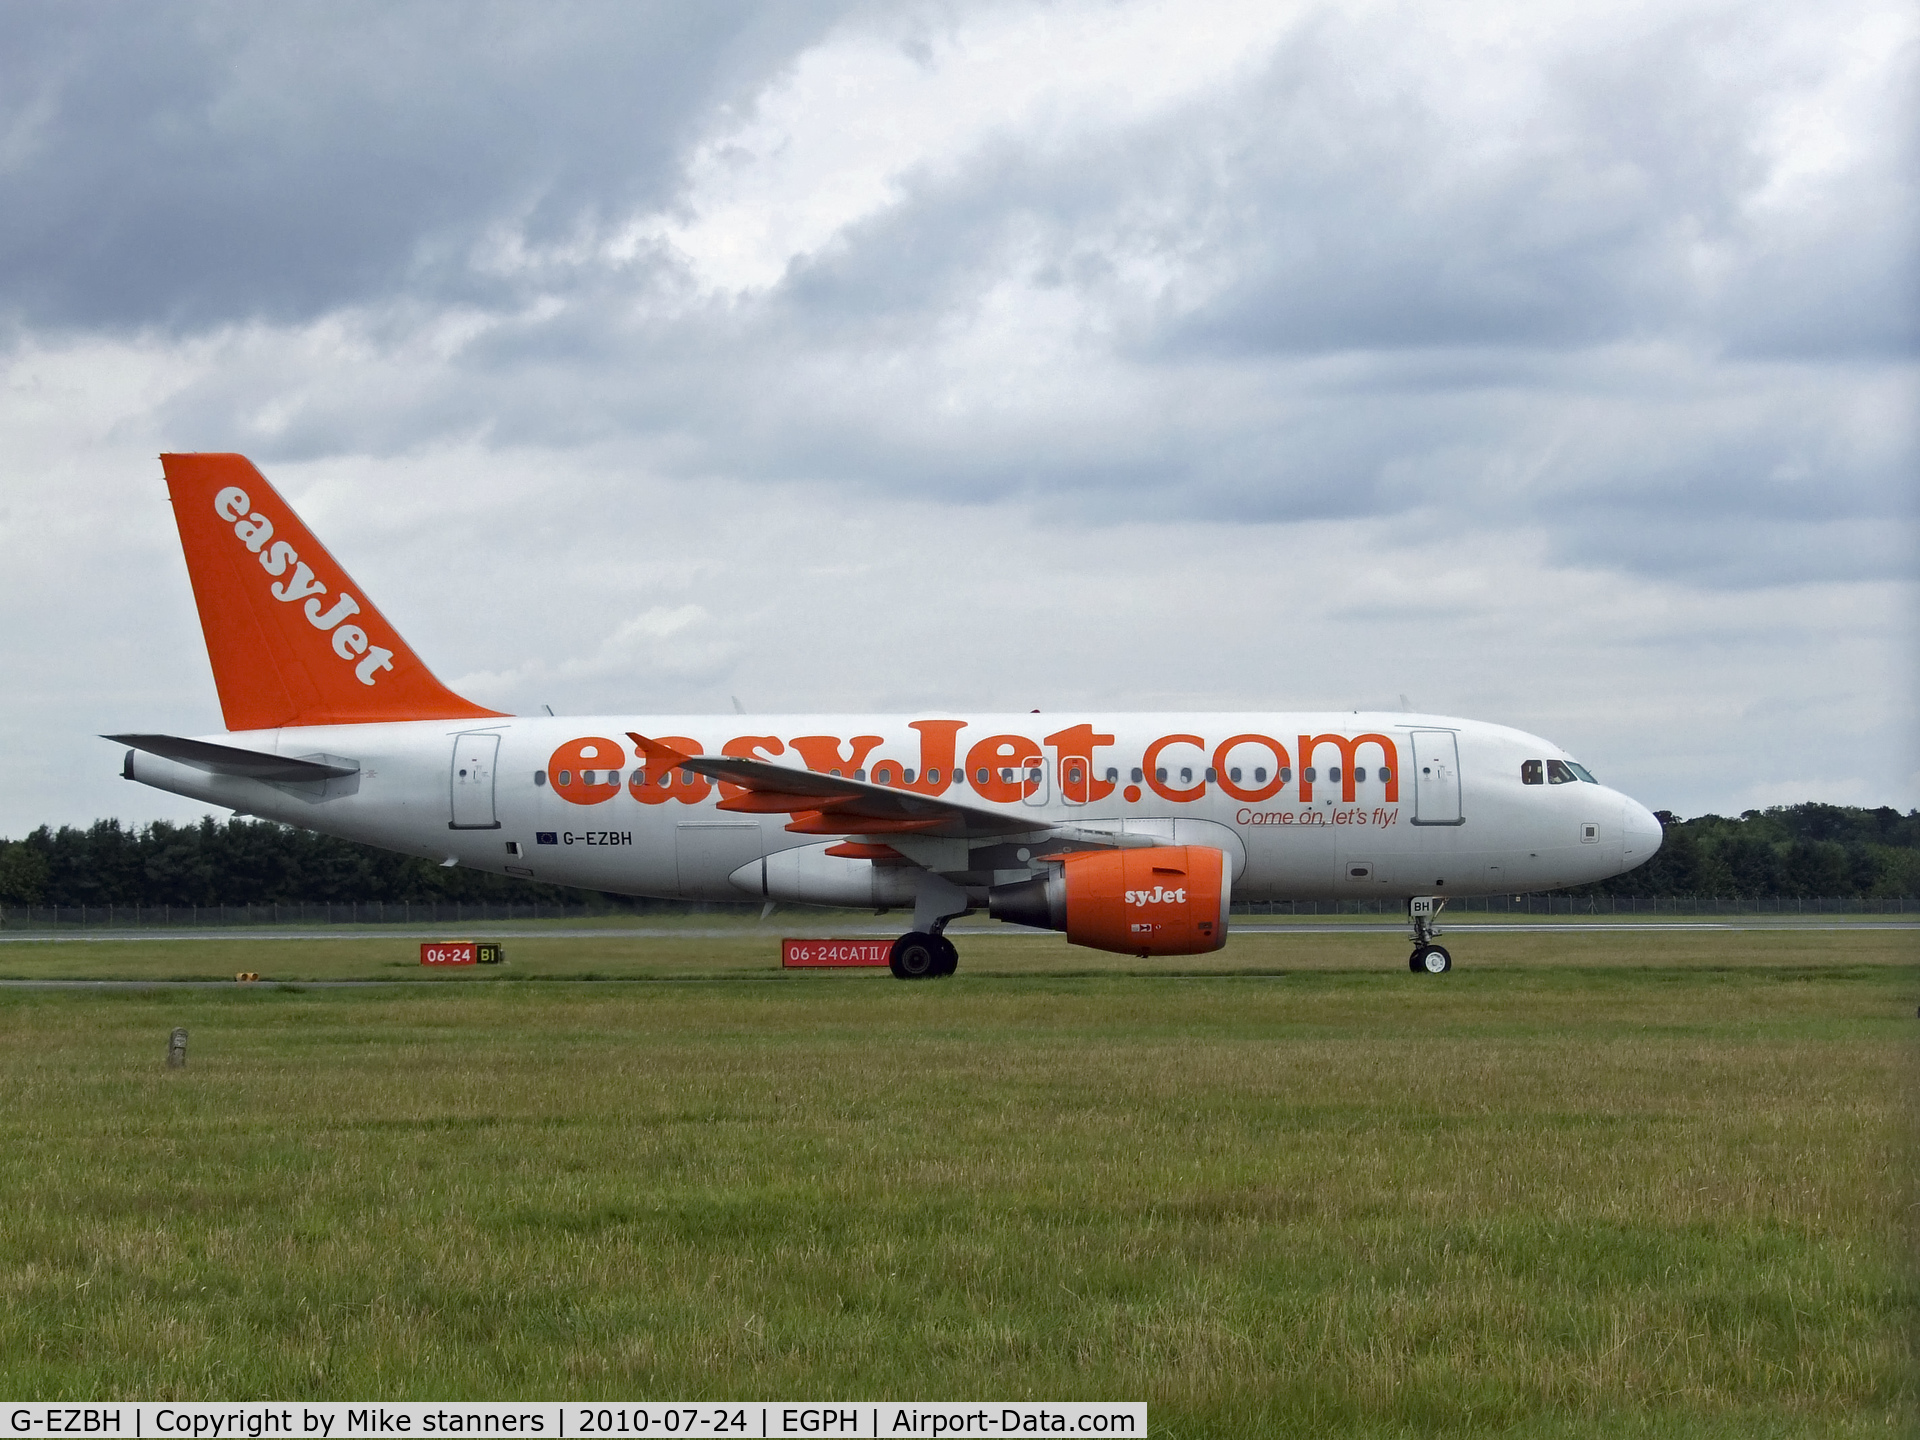 G-EZBH, 2006 Airbus A319-111 C/N 2959, Easyjet A319 arrives from MXP